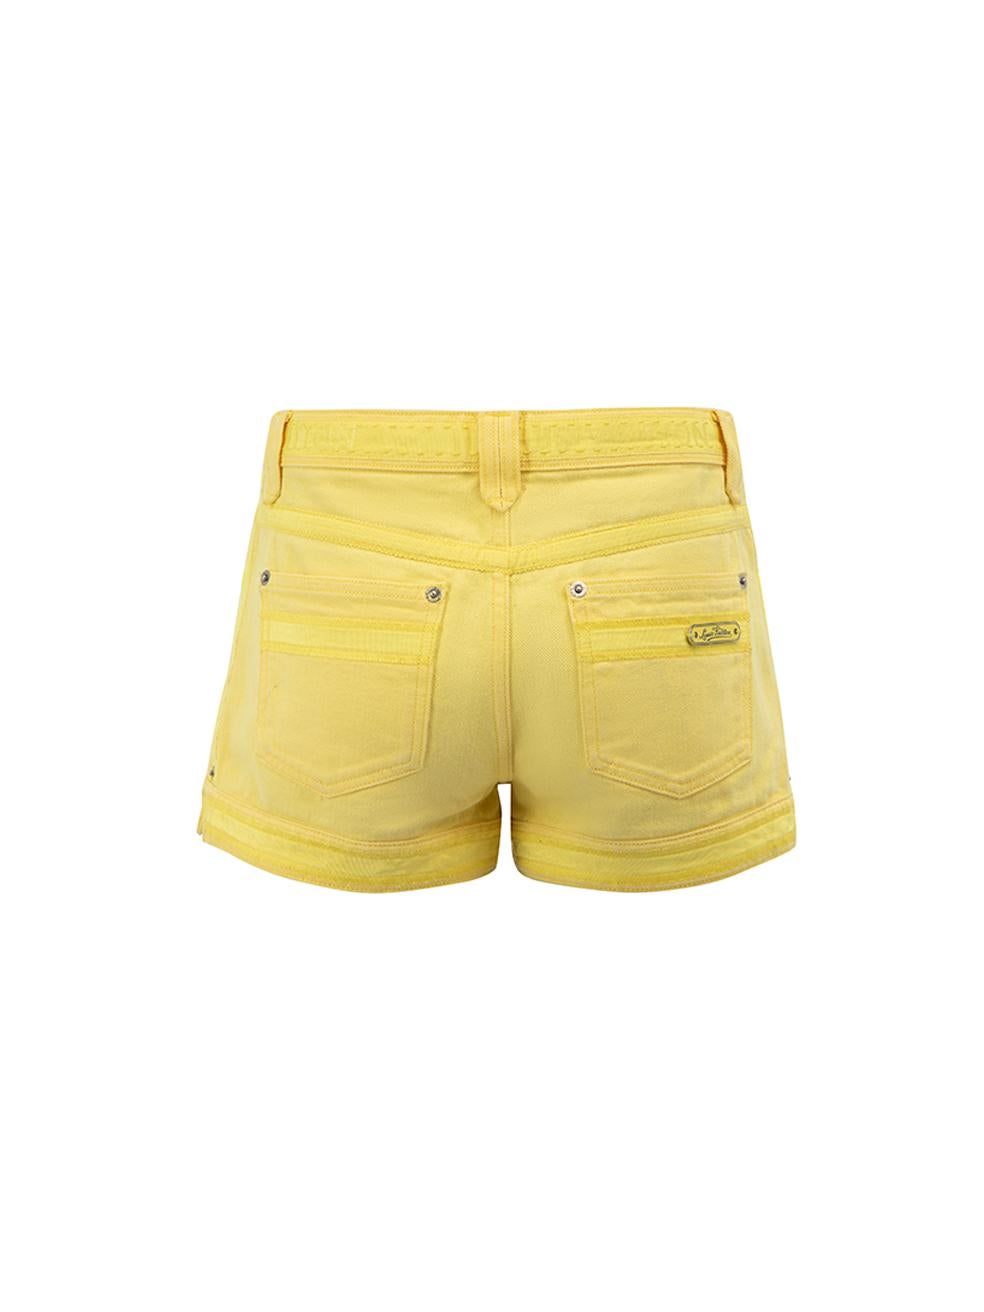 Louis Vuitton Yellow Denim Low Rise Shorts Size M In Good Condition For Sale In London, GB